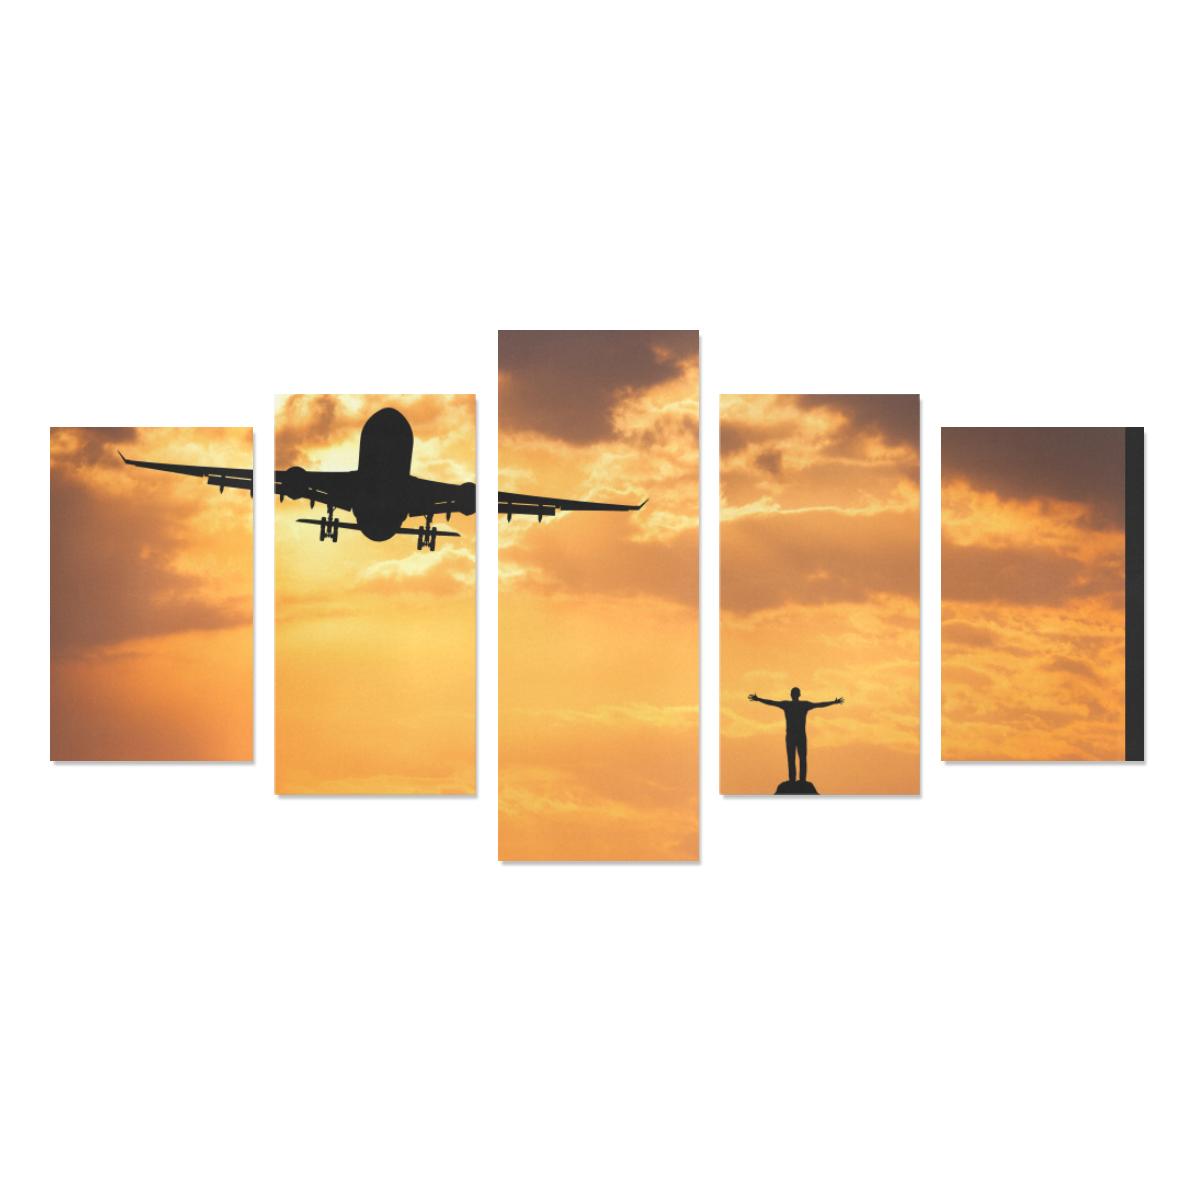 AIRPLANE AND SILHOUETTE OF AIRBUS STANDING HAPPY MAN. CANVAS PRINT SETS C (NO FRAME) THE AV8R